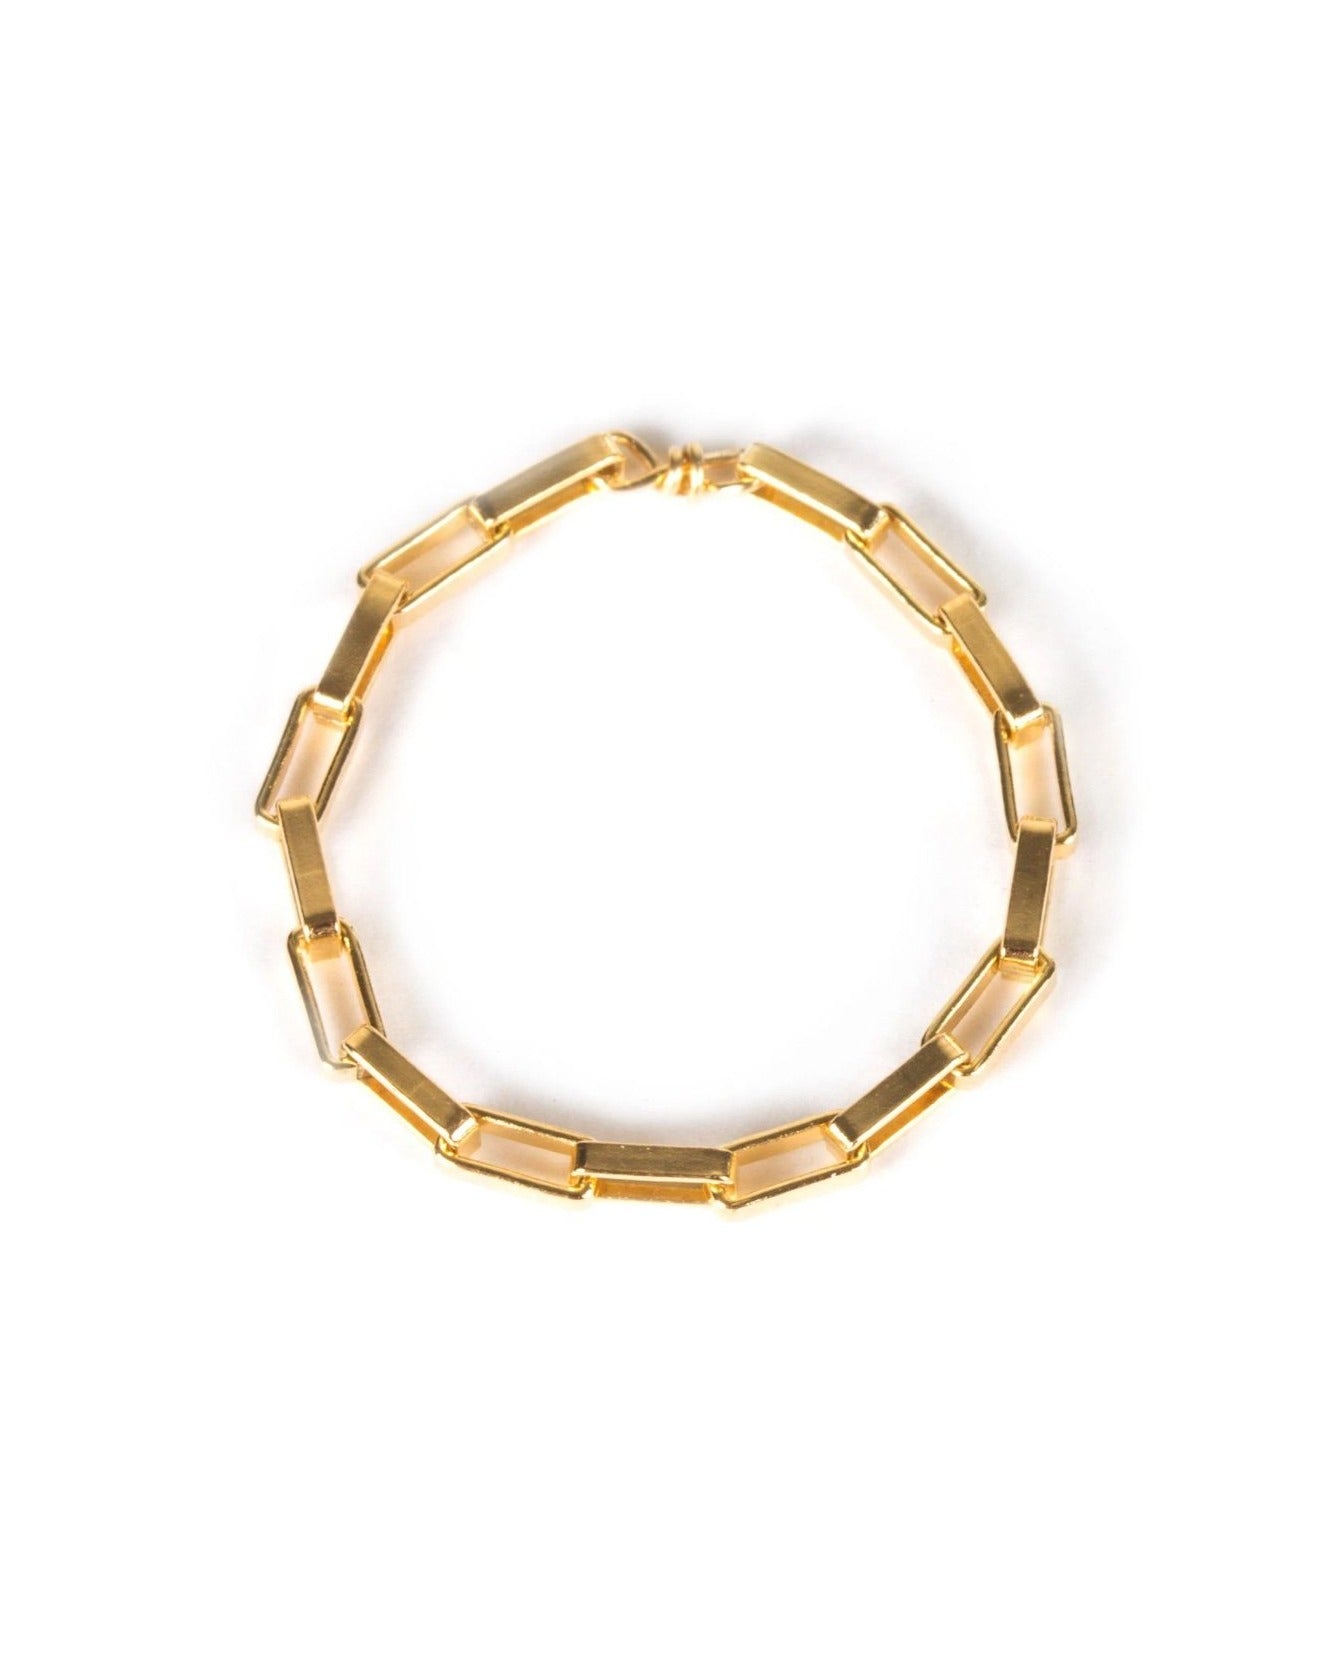 Link Chain Ring by KOZAKH. A soft link chain ring crafted in 14K Gold Filled.